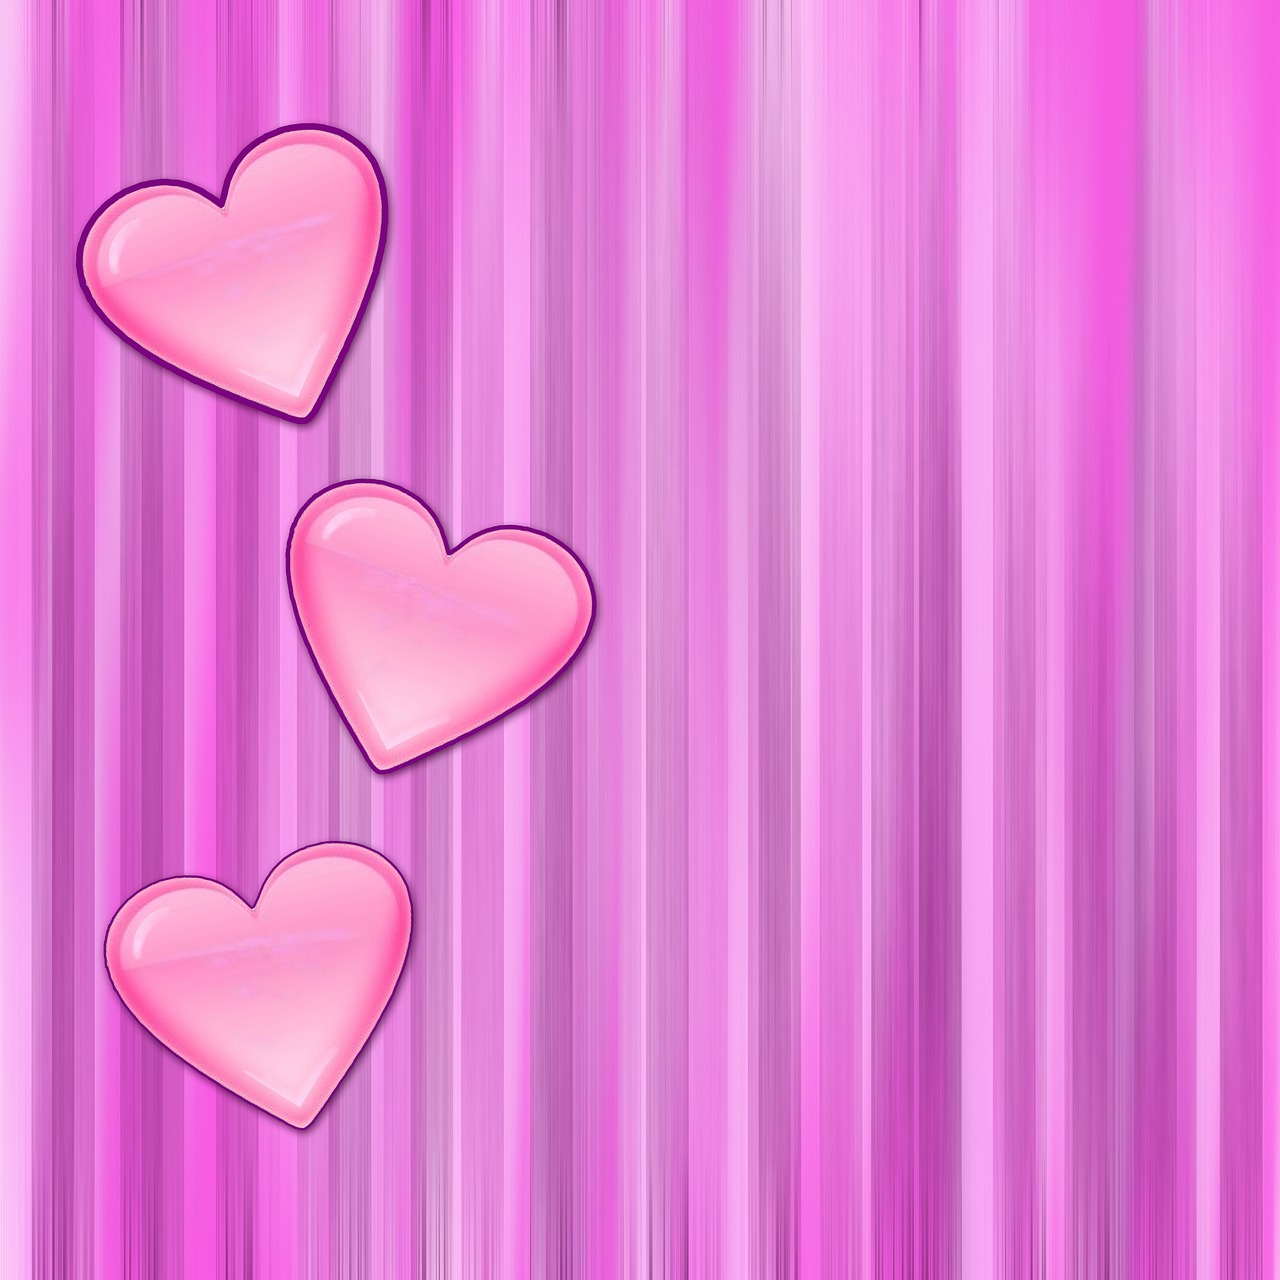 background heart pink free photo